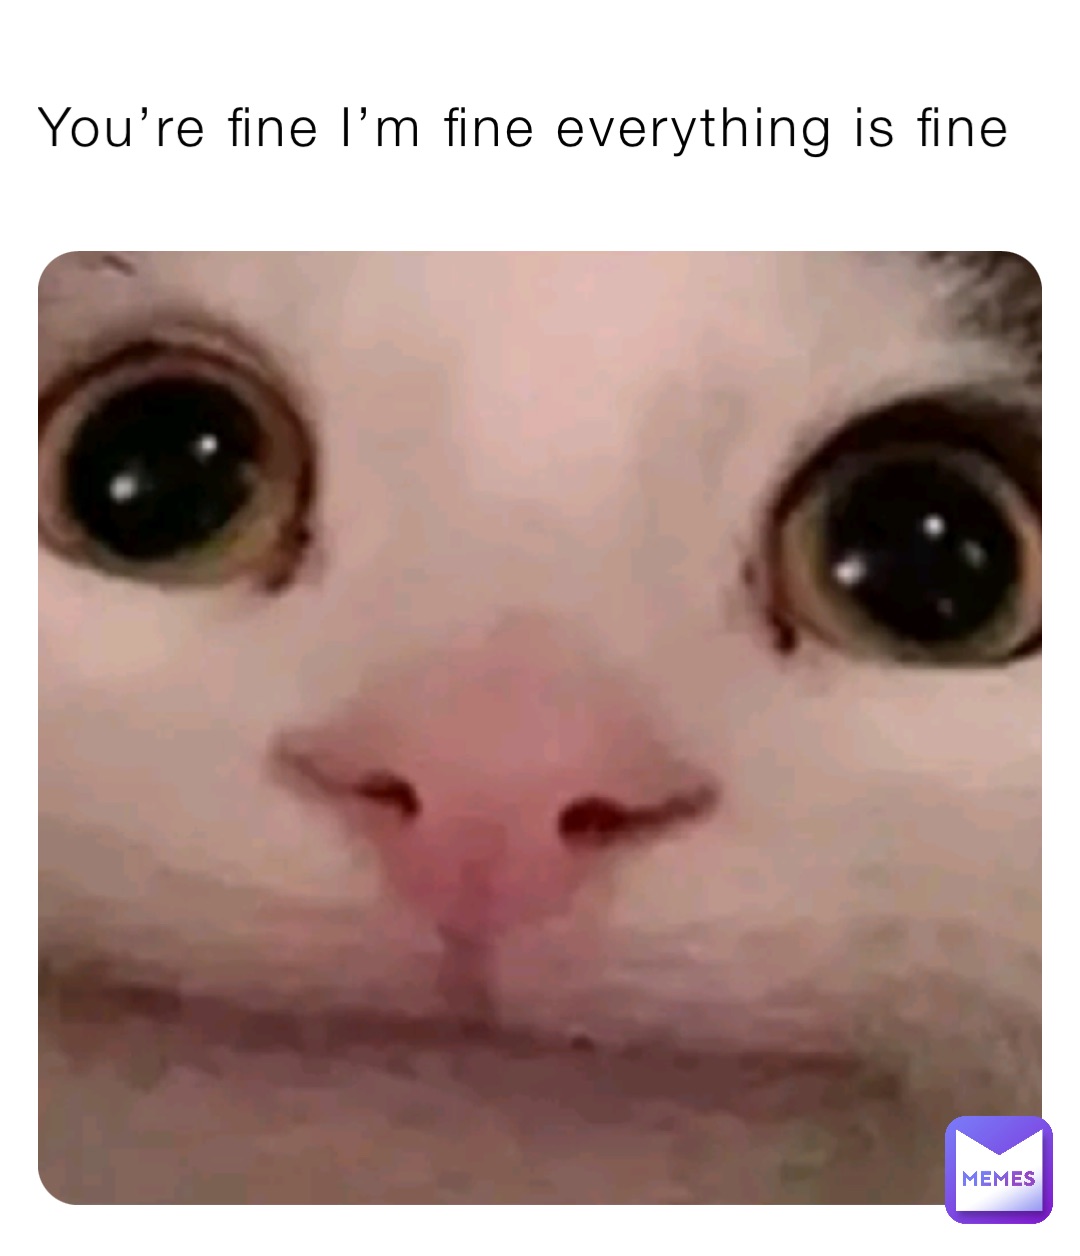 You’re fine I’m fine everything is fine